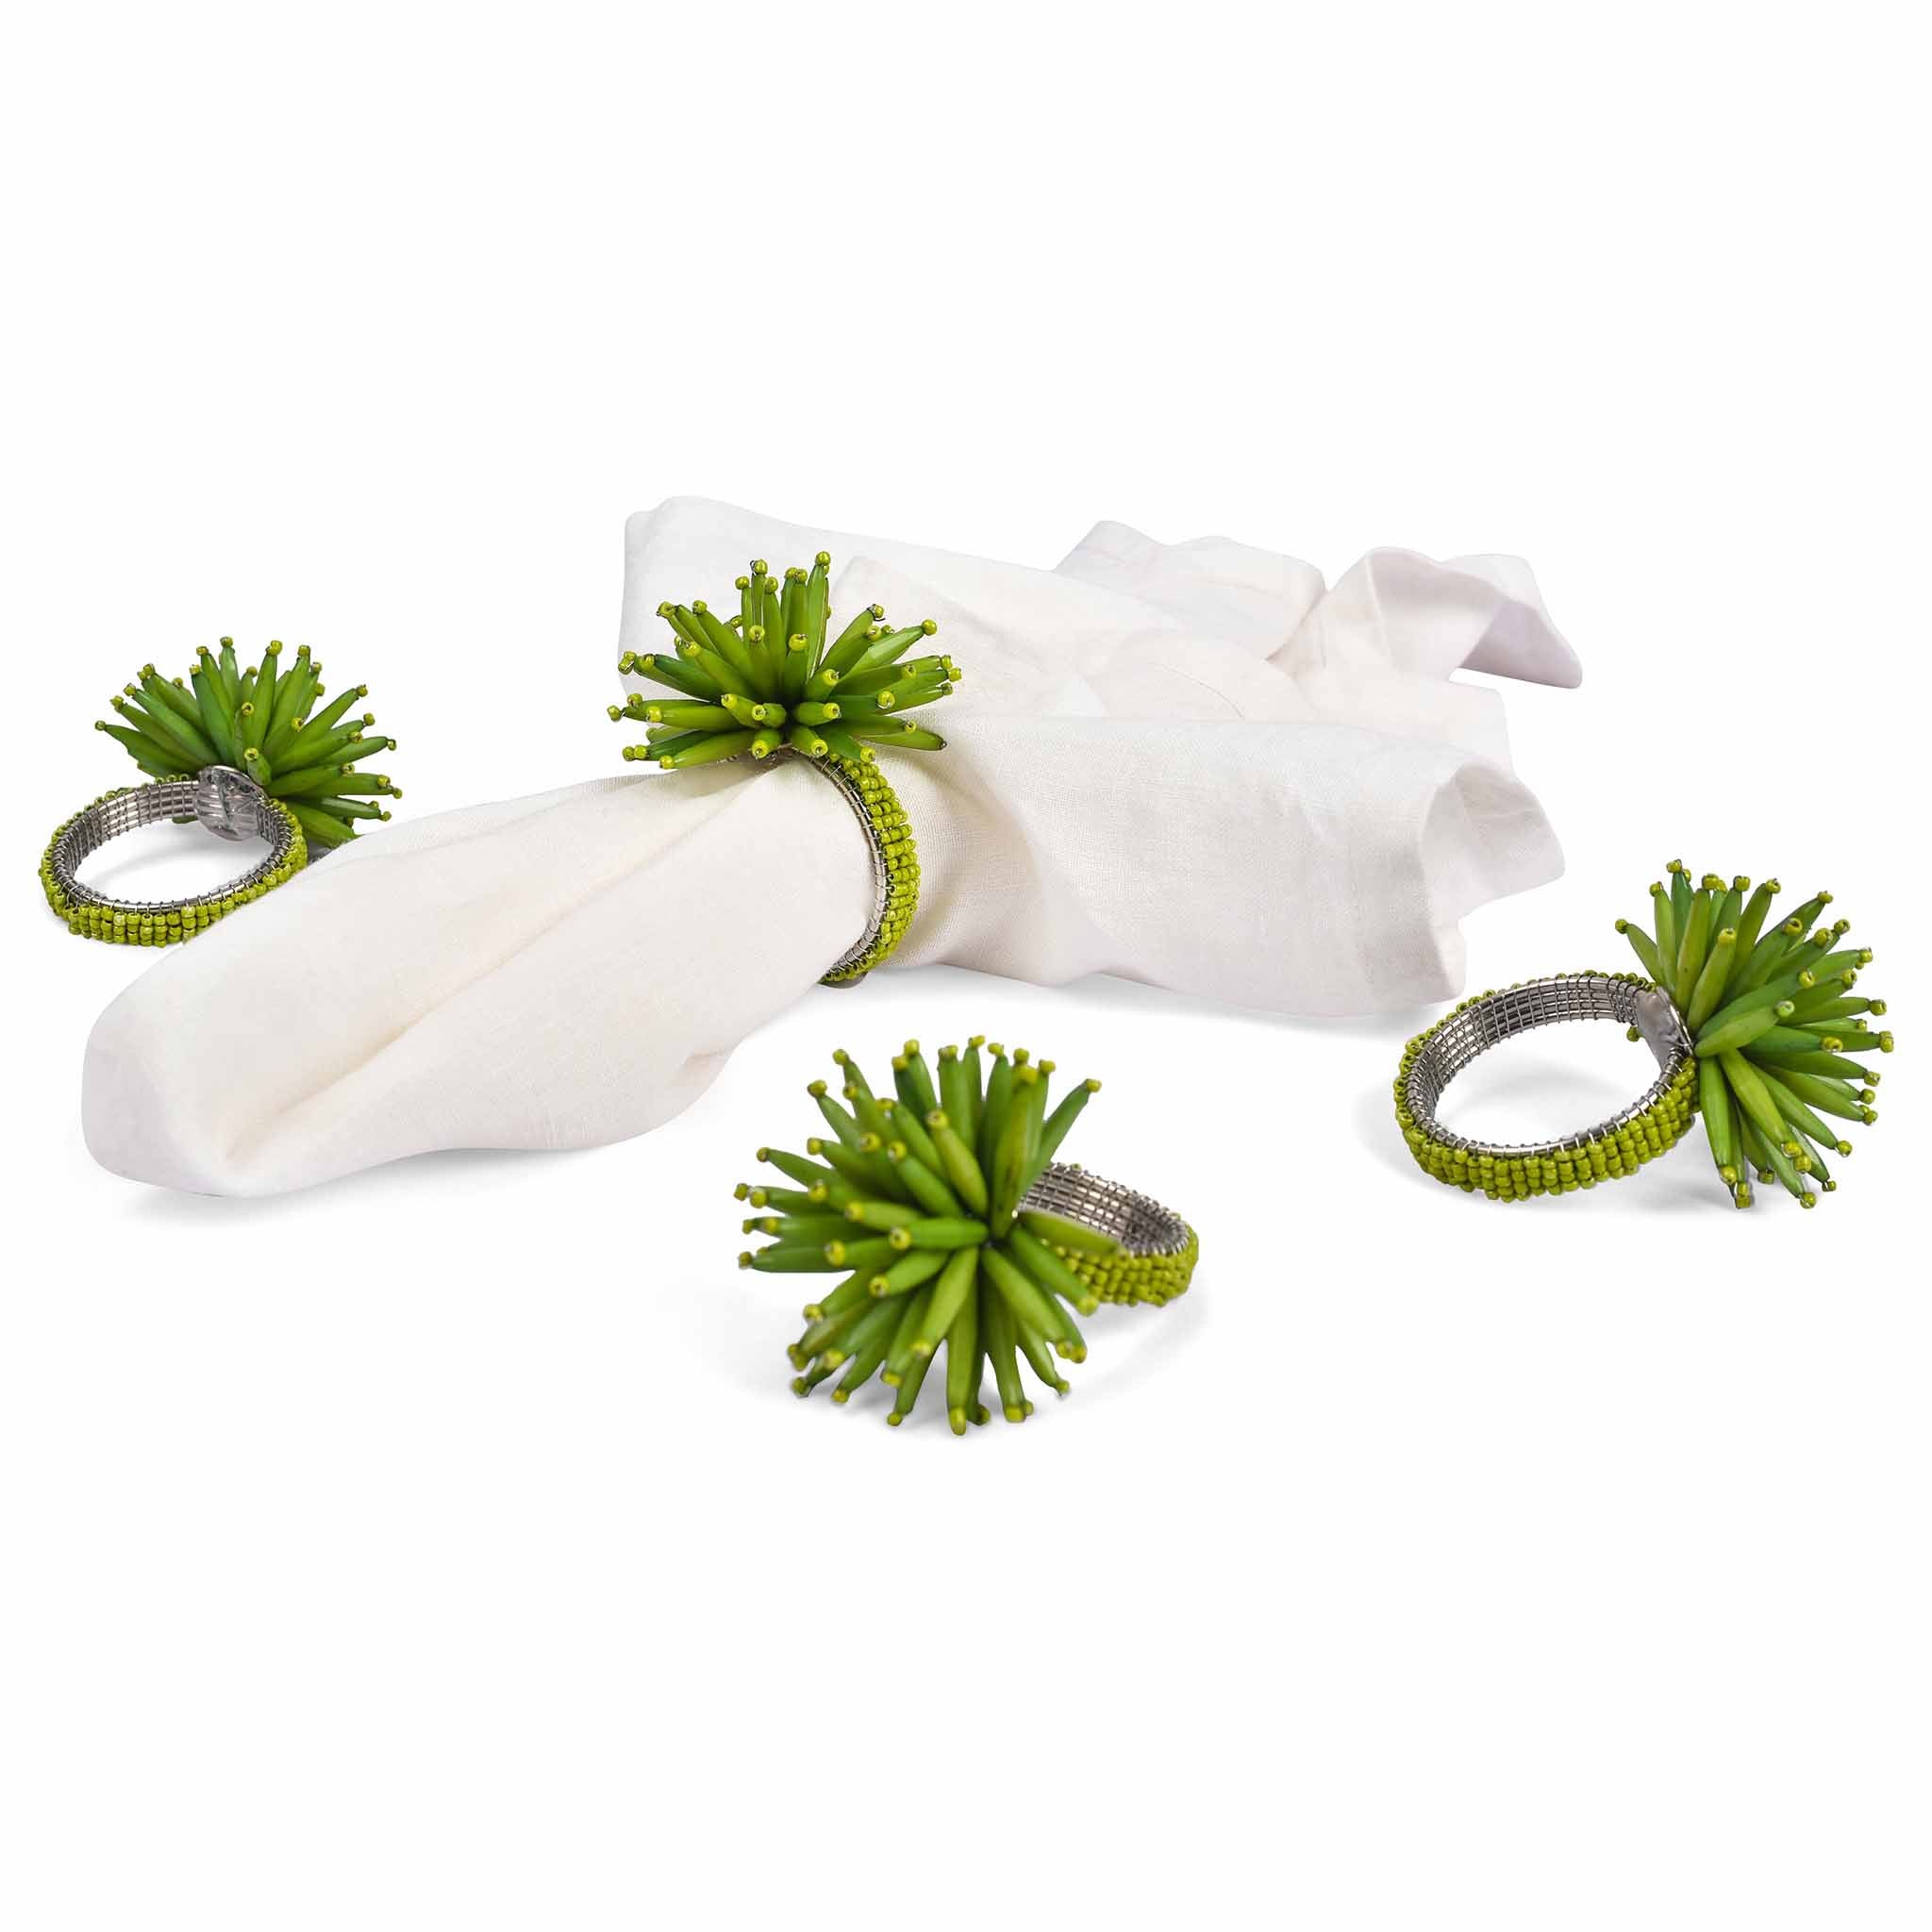 Beaded Thistle Napkin Ring in Green, Set of 4